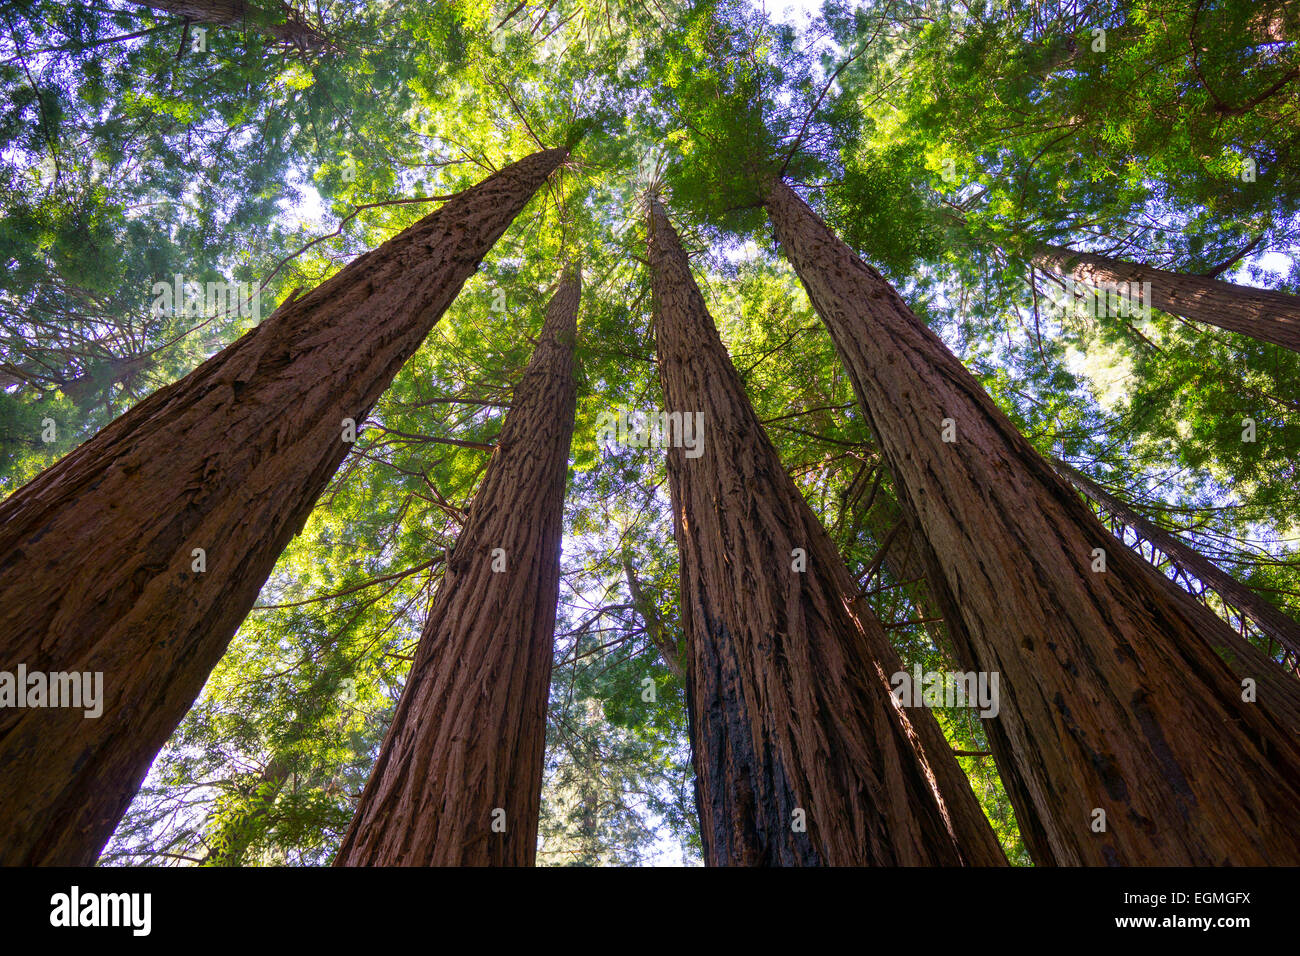 Large redwood trees in Muir Woods on a sunny day in northern California, San Francisco. Stock Photo